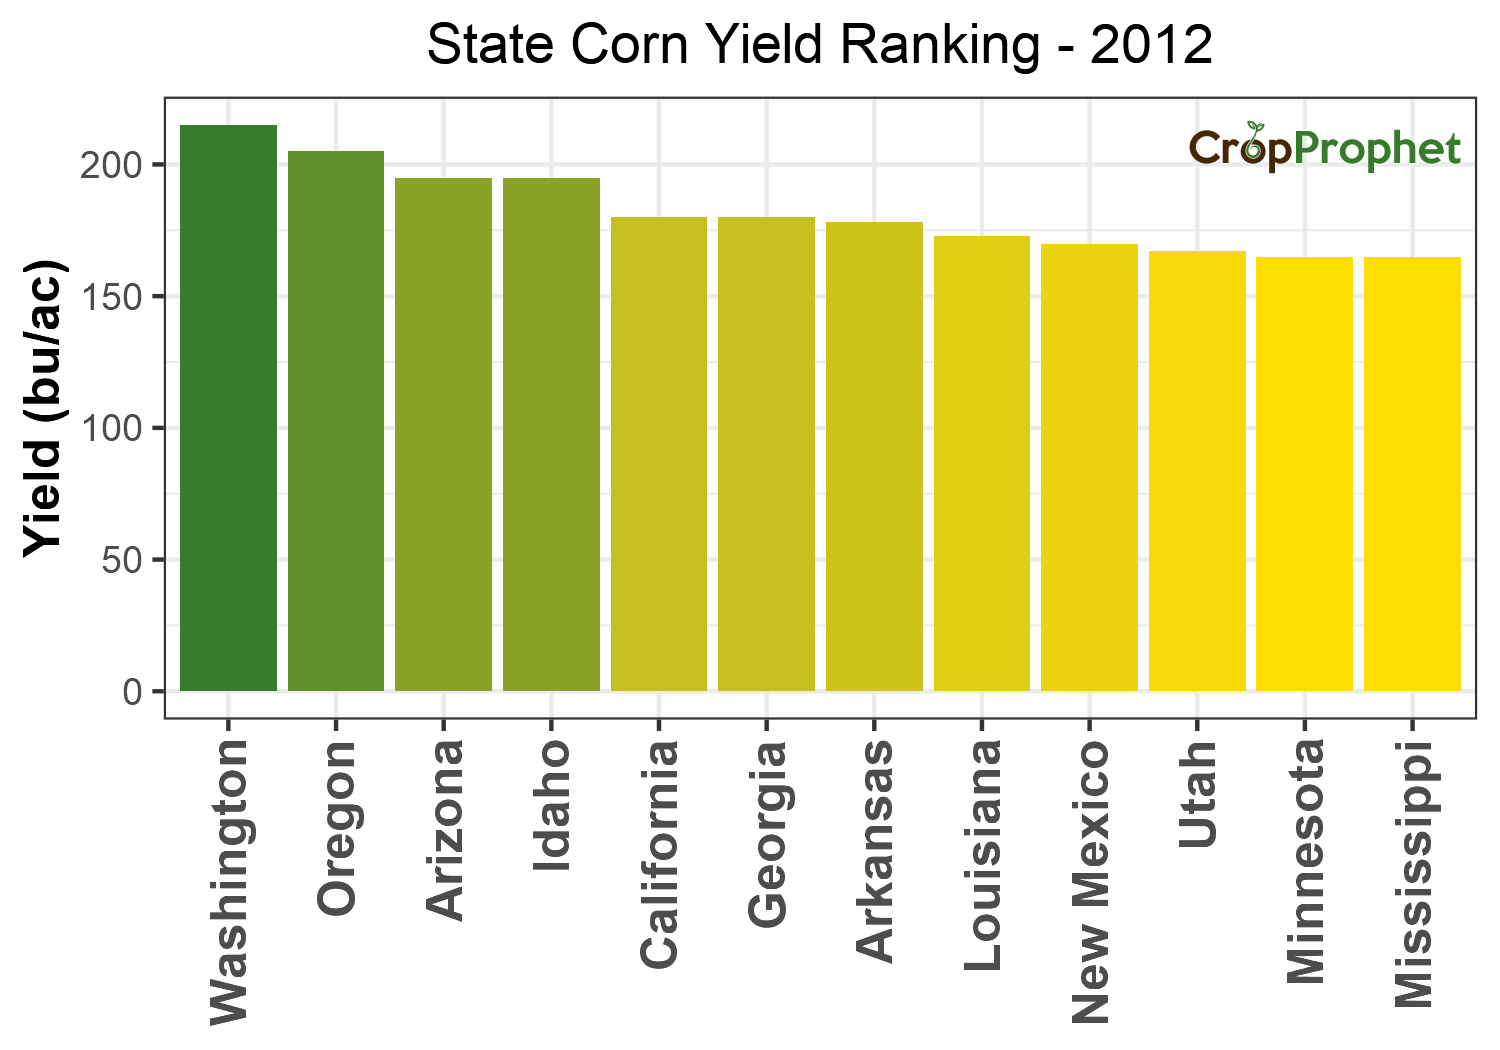 Corn Production by State - 2012 Rankings